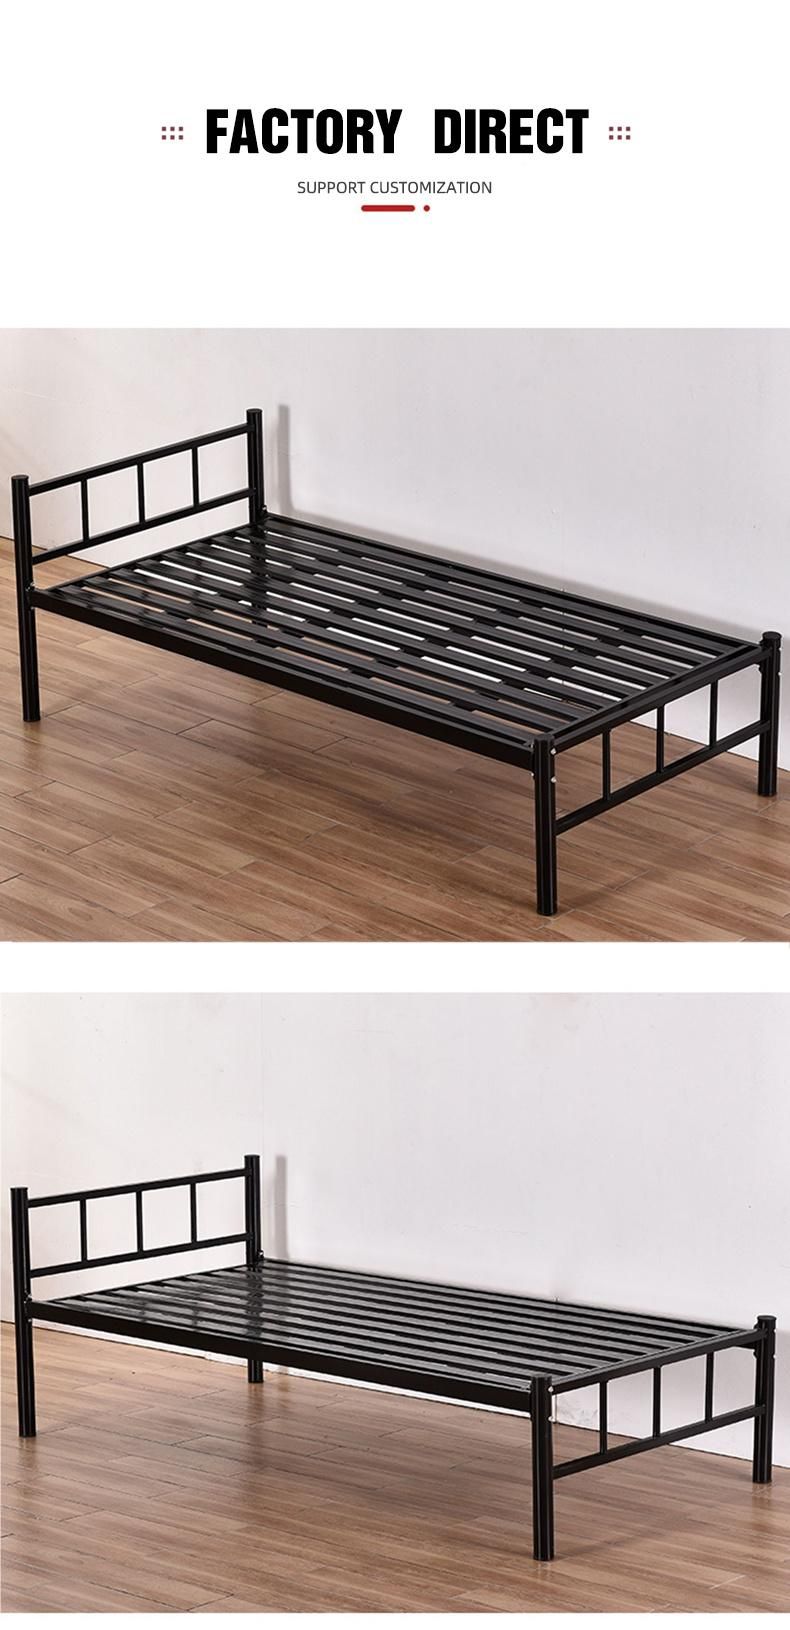 Fashion Metal Bed Furniture Wrought Iron Metal Bed Design for Bedroom-Apartment-Loft Supplier